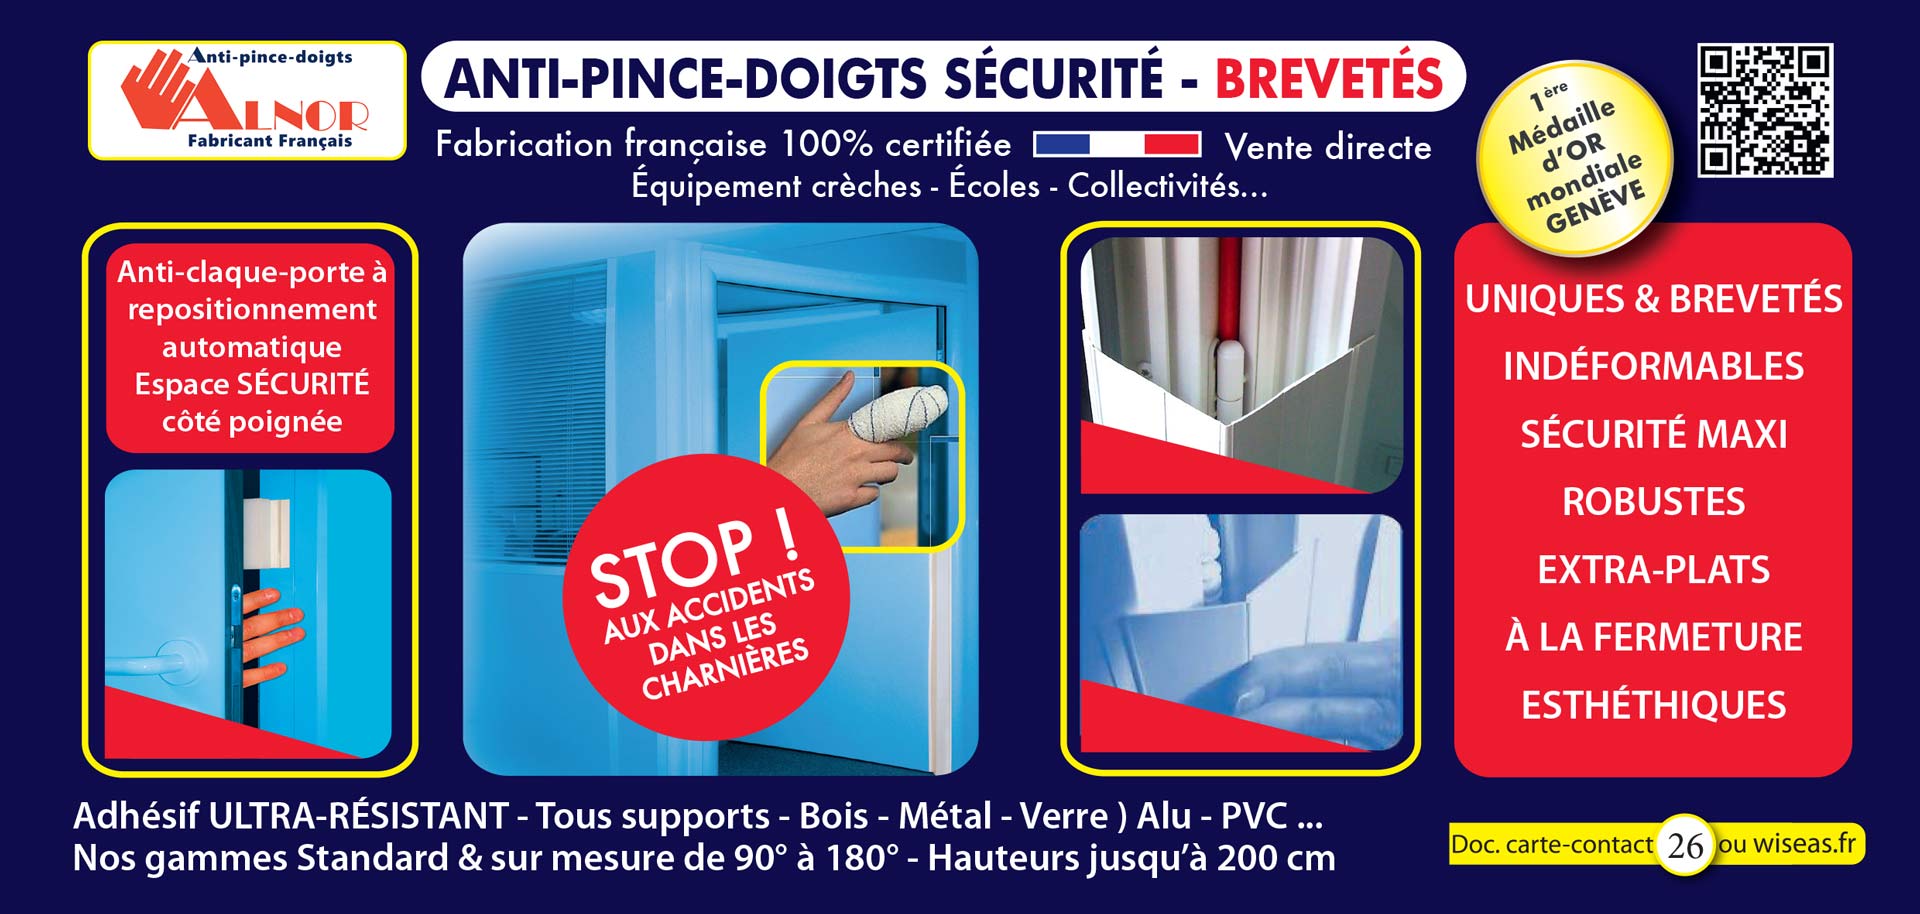 Anti-pince-doigts